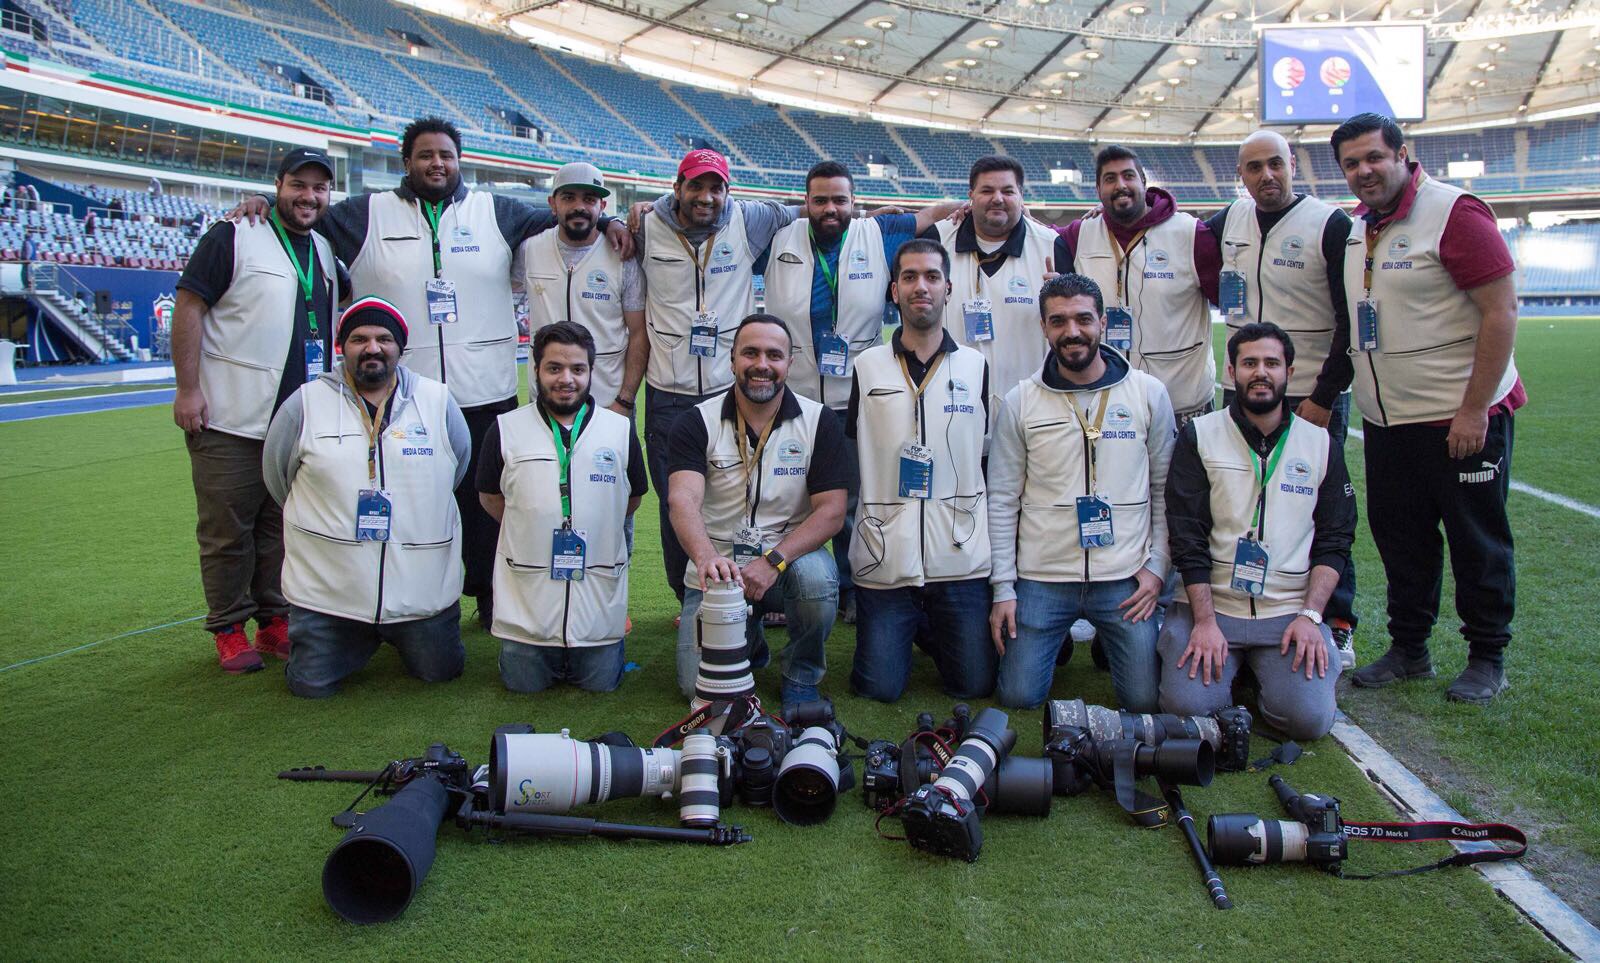 Kuwaiti youth from the Kuwait Football Association's (KFA) photography team are making a unique voluntary effort in covering events of the 23rd Arabian Gulf Cup football